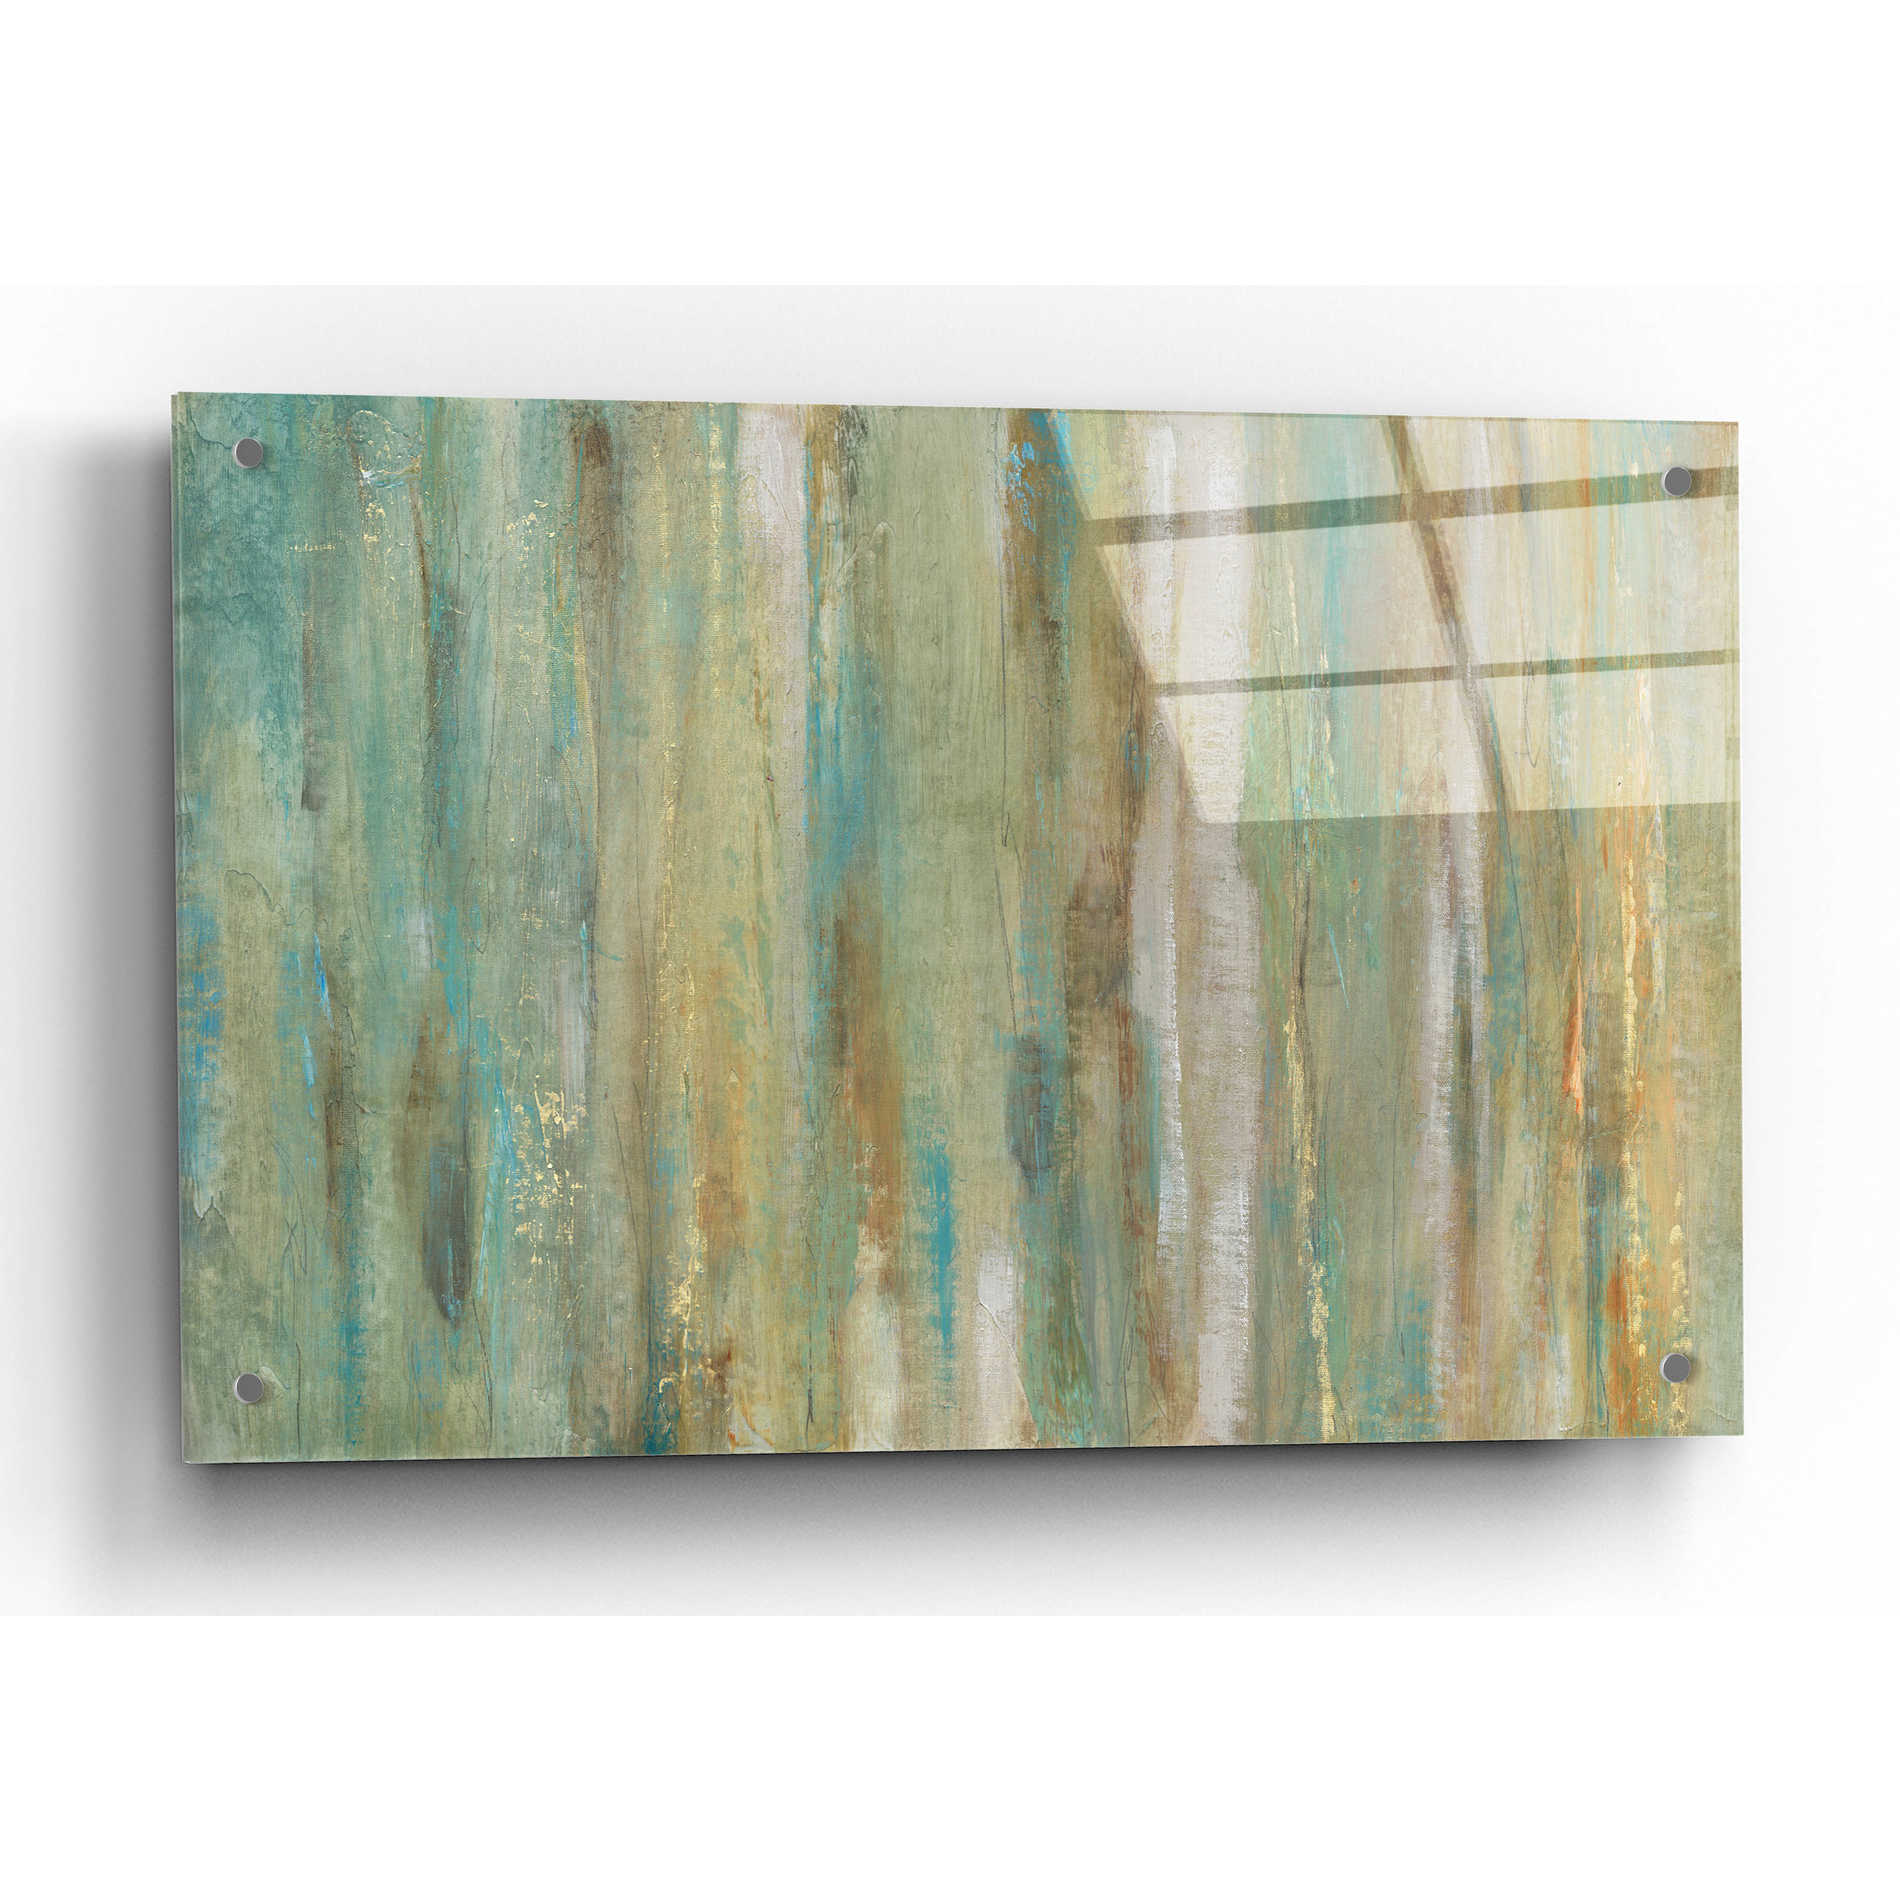 Epic Art 'Vertical Flow I' by Tim O'Toole, Acrylic Glass Wall Art,36x24